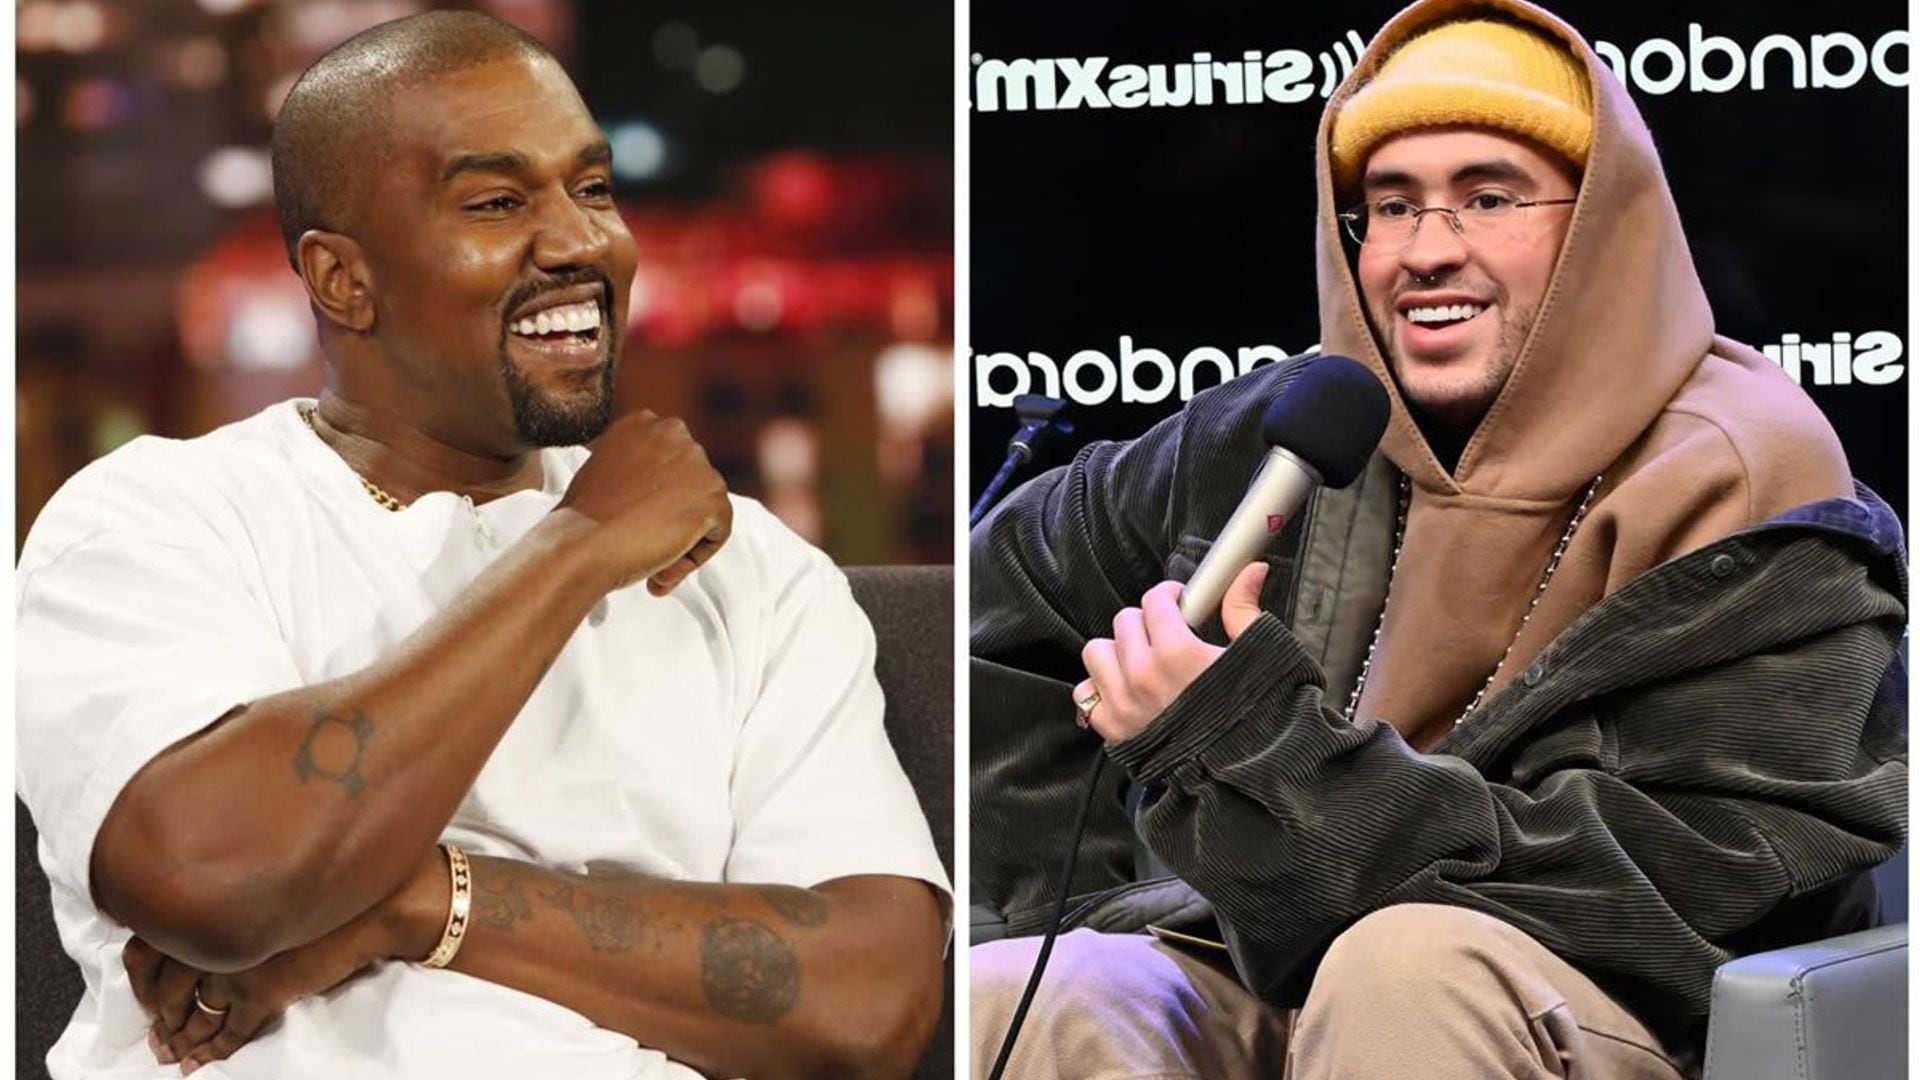 Is Bad Bunny really in the studio with Kanye West?